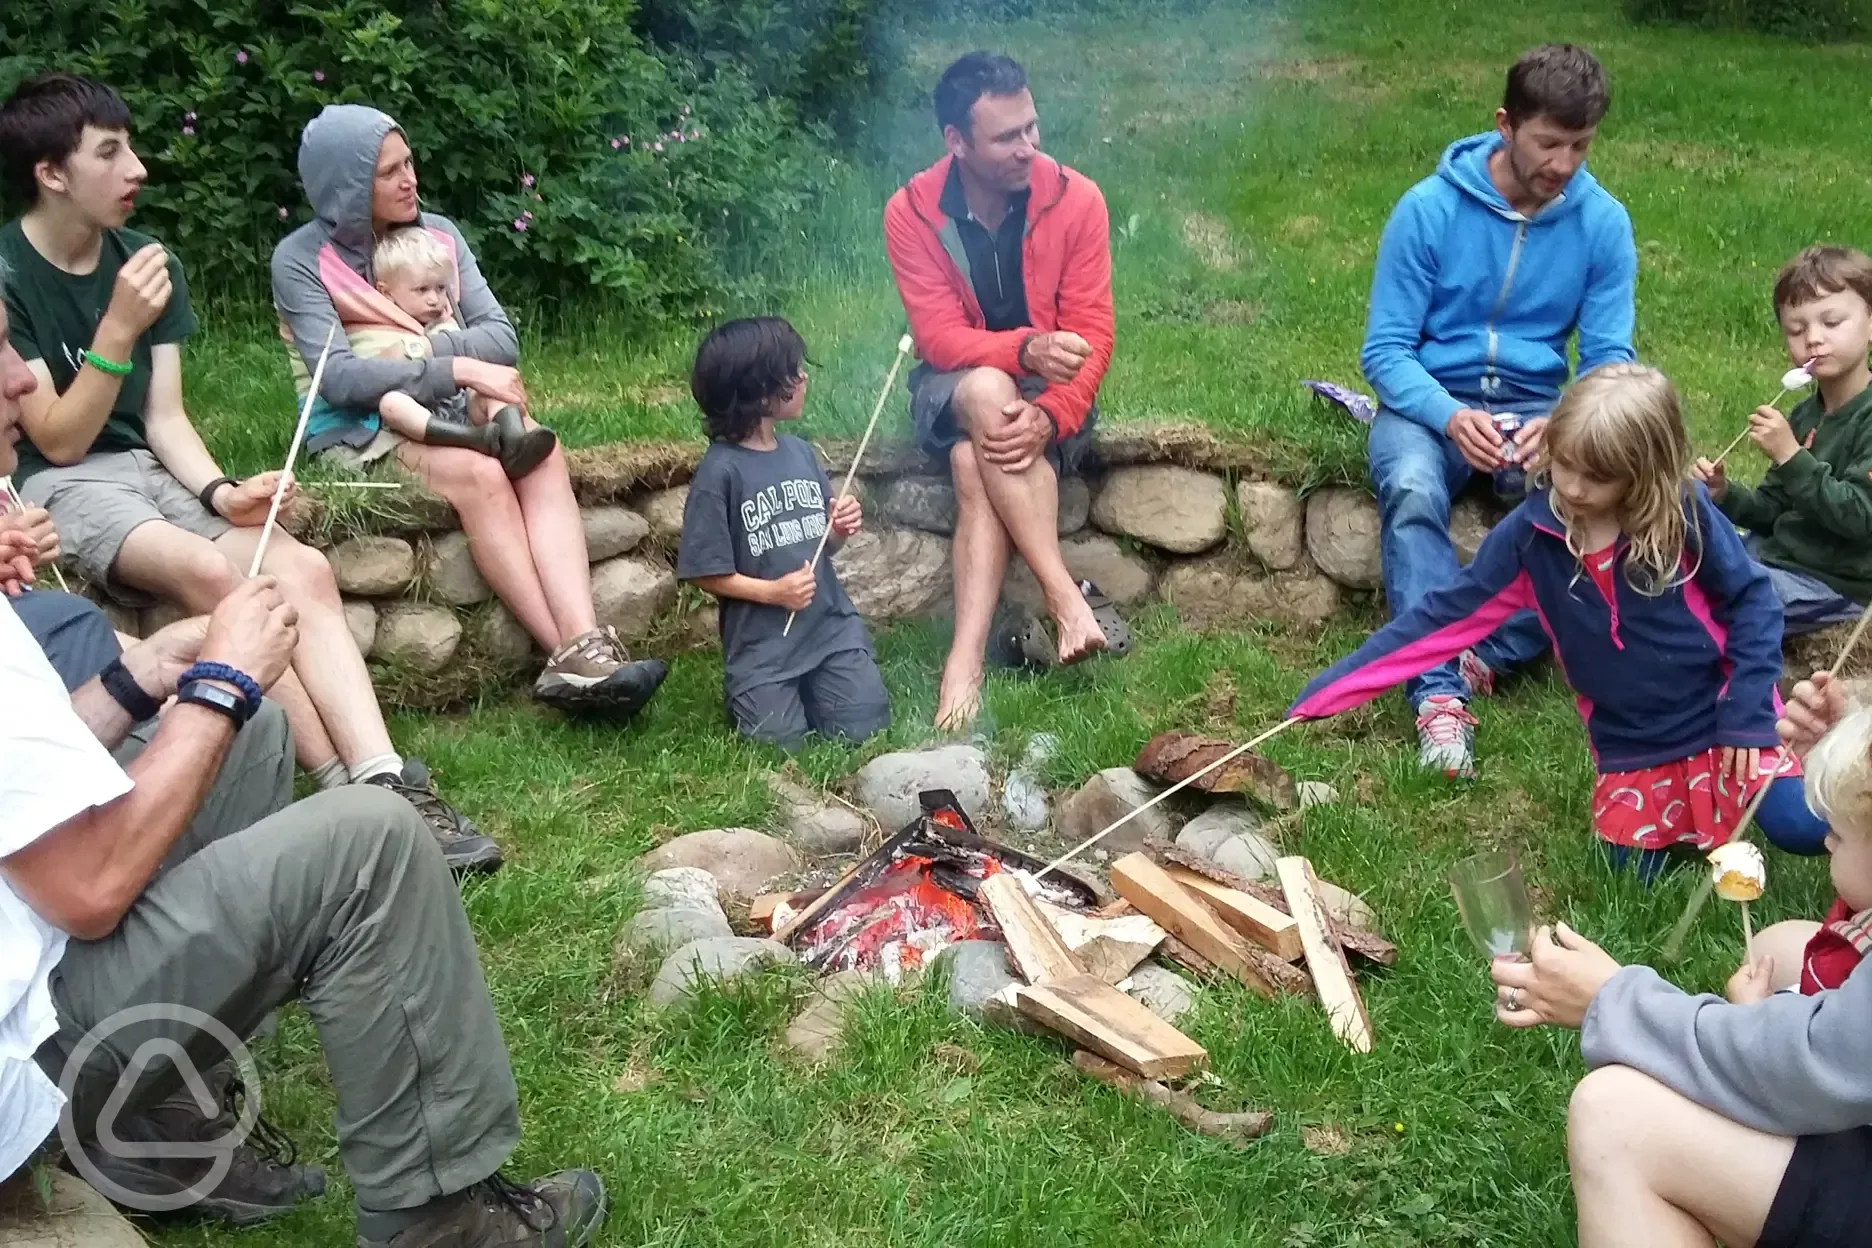 Communal camp fire and marshmallow toasting